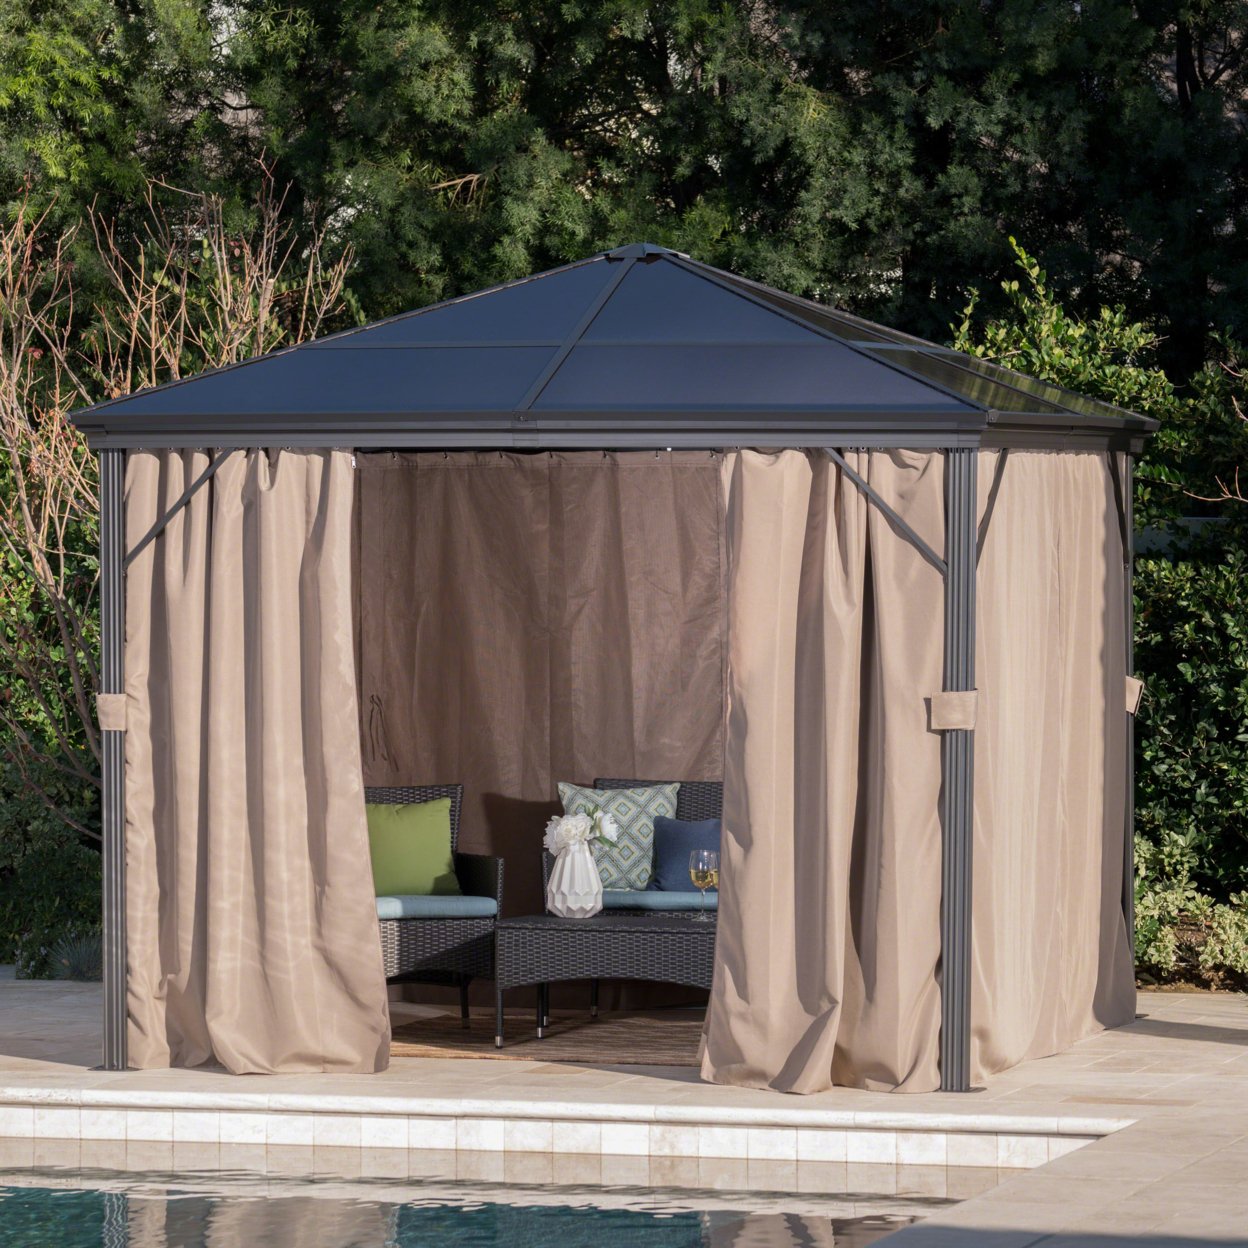 Bali Outdoor 10 X 10 Foot Rust Proof Aluminum Framed Hardtop Gazebo With Curtains - Gray/Black